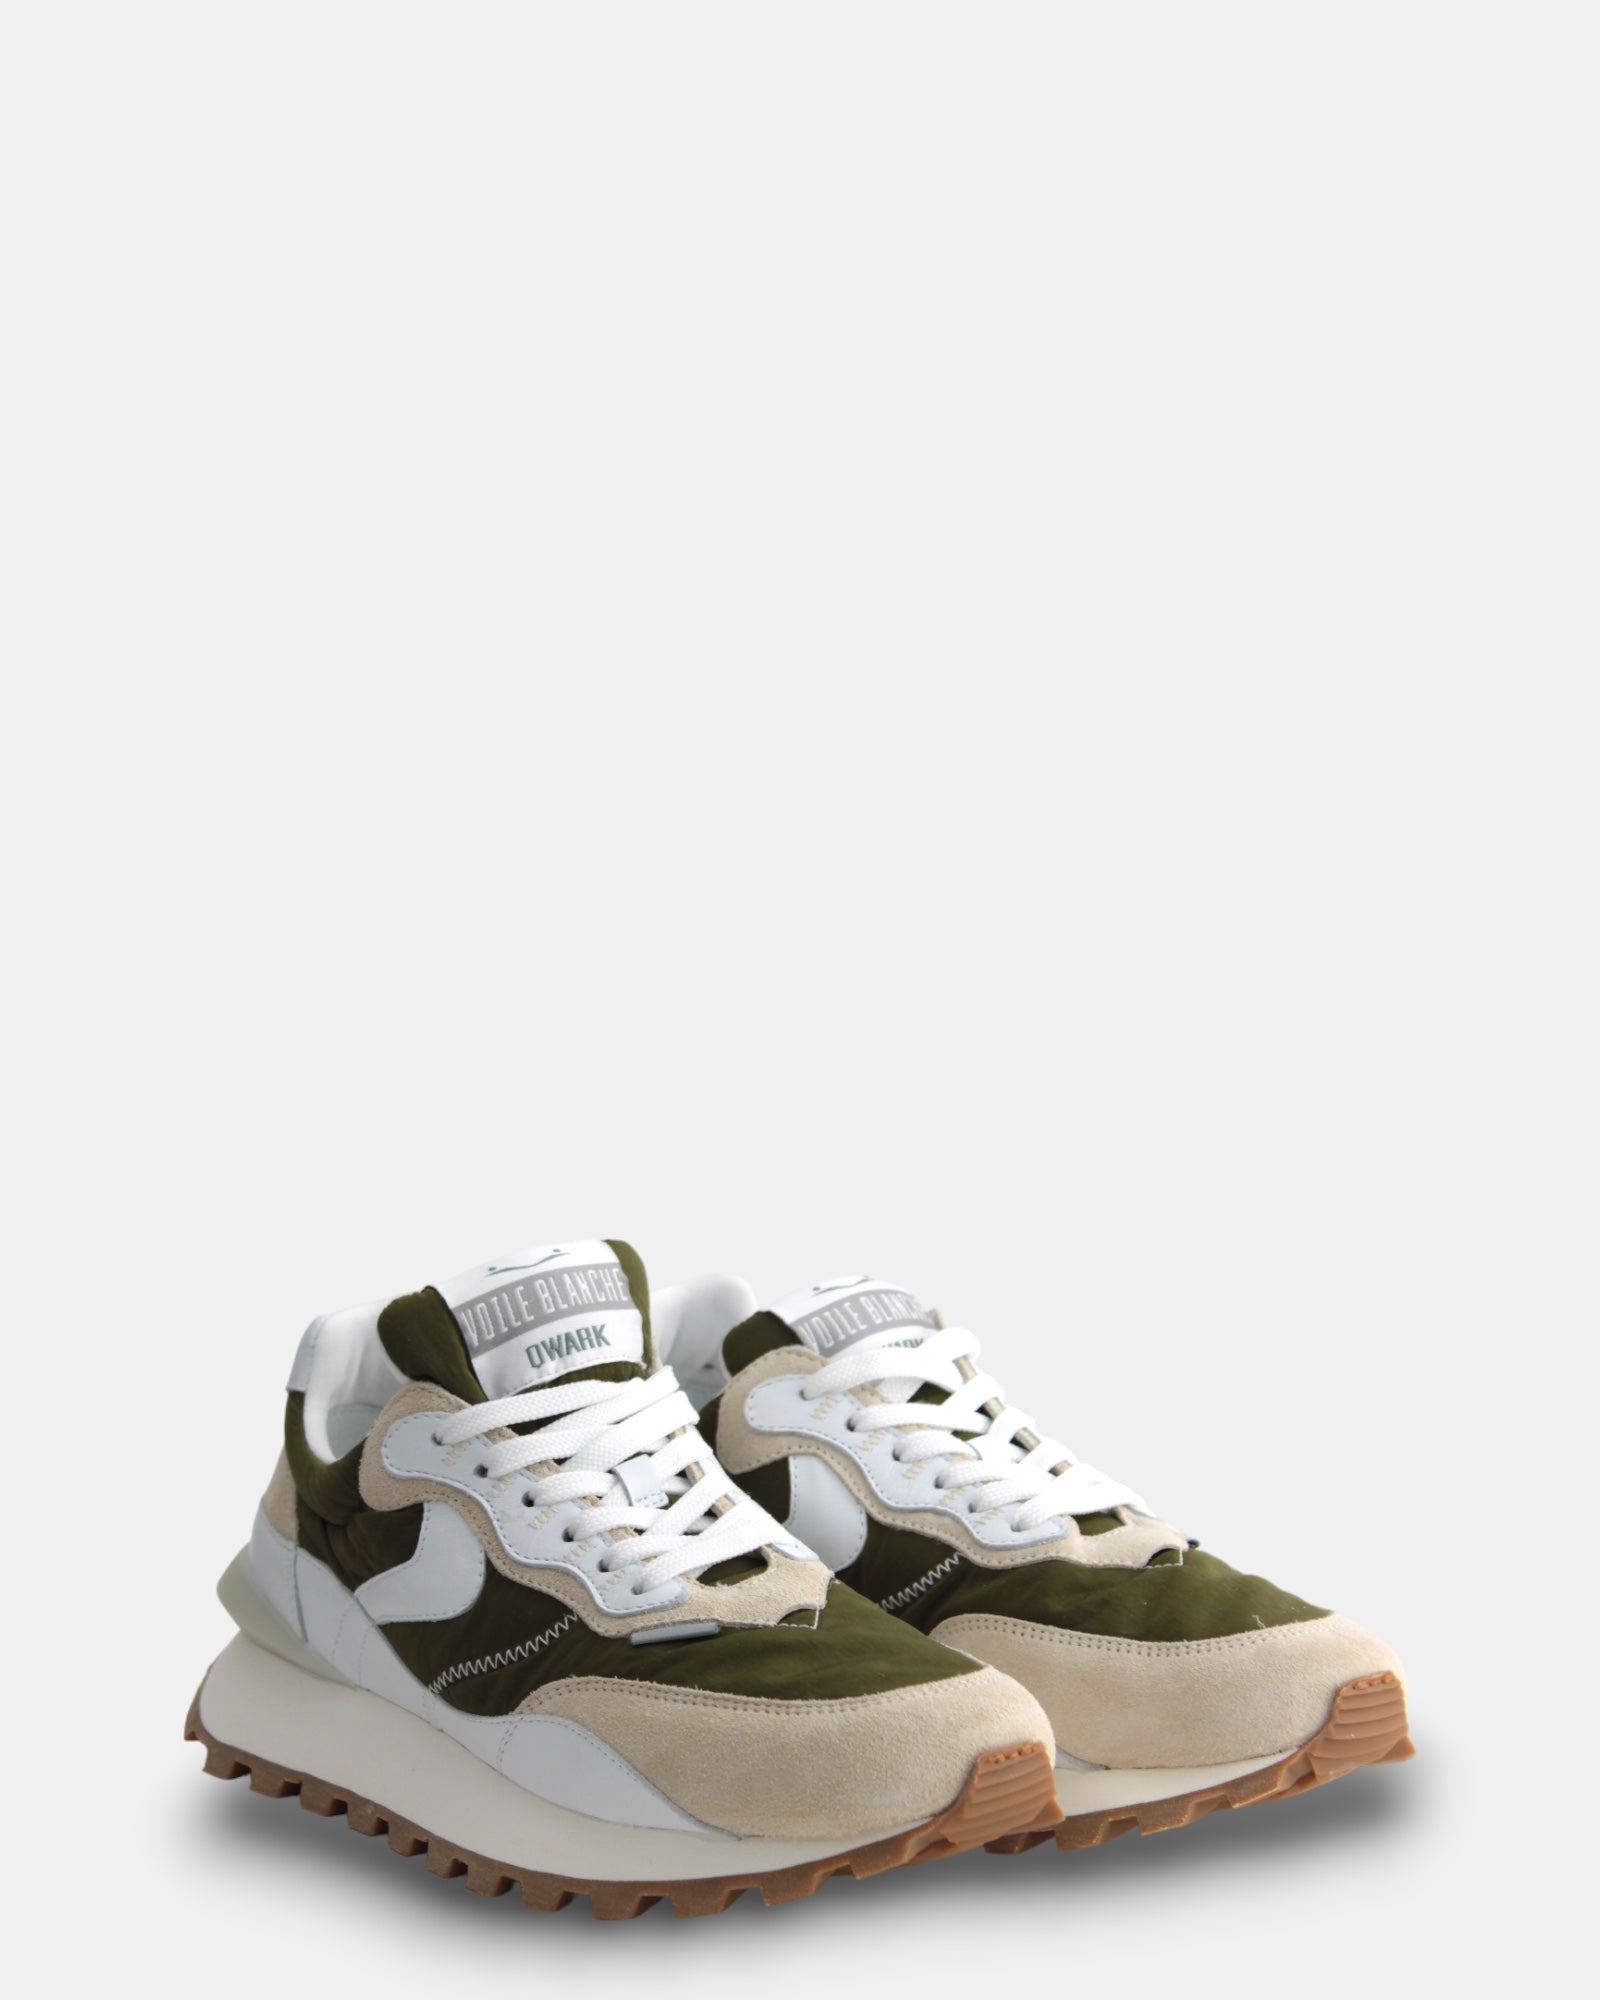 SNEAKERS White/army Voile Blanche